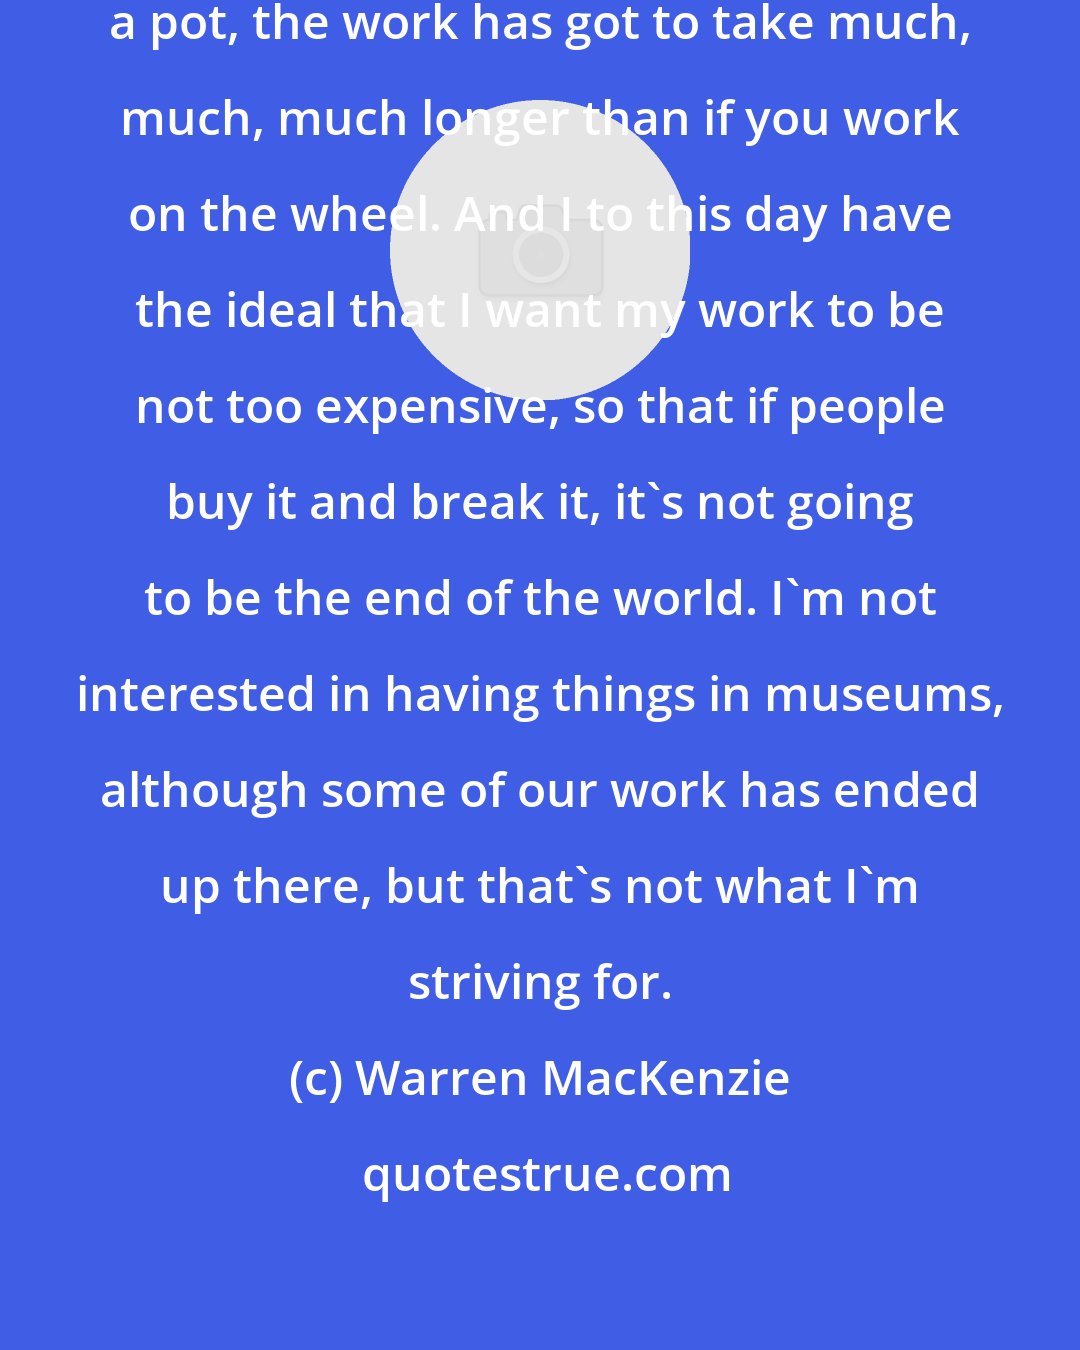 Warren MacKenzie: If you press-mold a pot or if you slab-build a pot, the work has got to take much, much, much longer than if you work on the wheel. And I to this day have the ideal that I want my work to be not too expensive, so that if people buy it and break it, it's not going to be the end of the world. I'm not interested in having things in museums, although some of our work has ended up there, but that's not what I'm striving for.